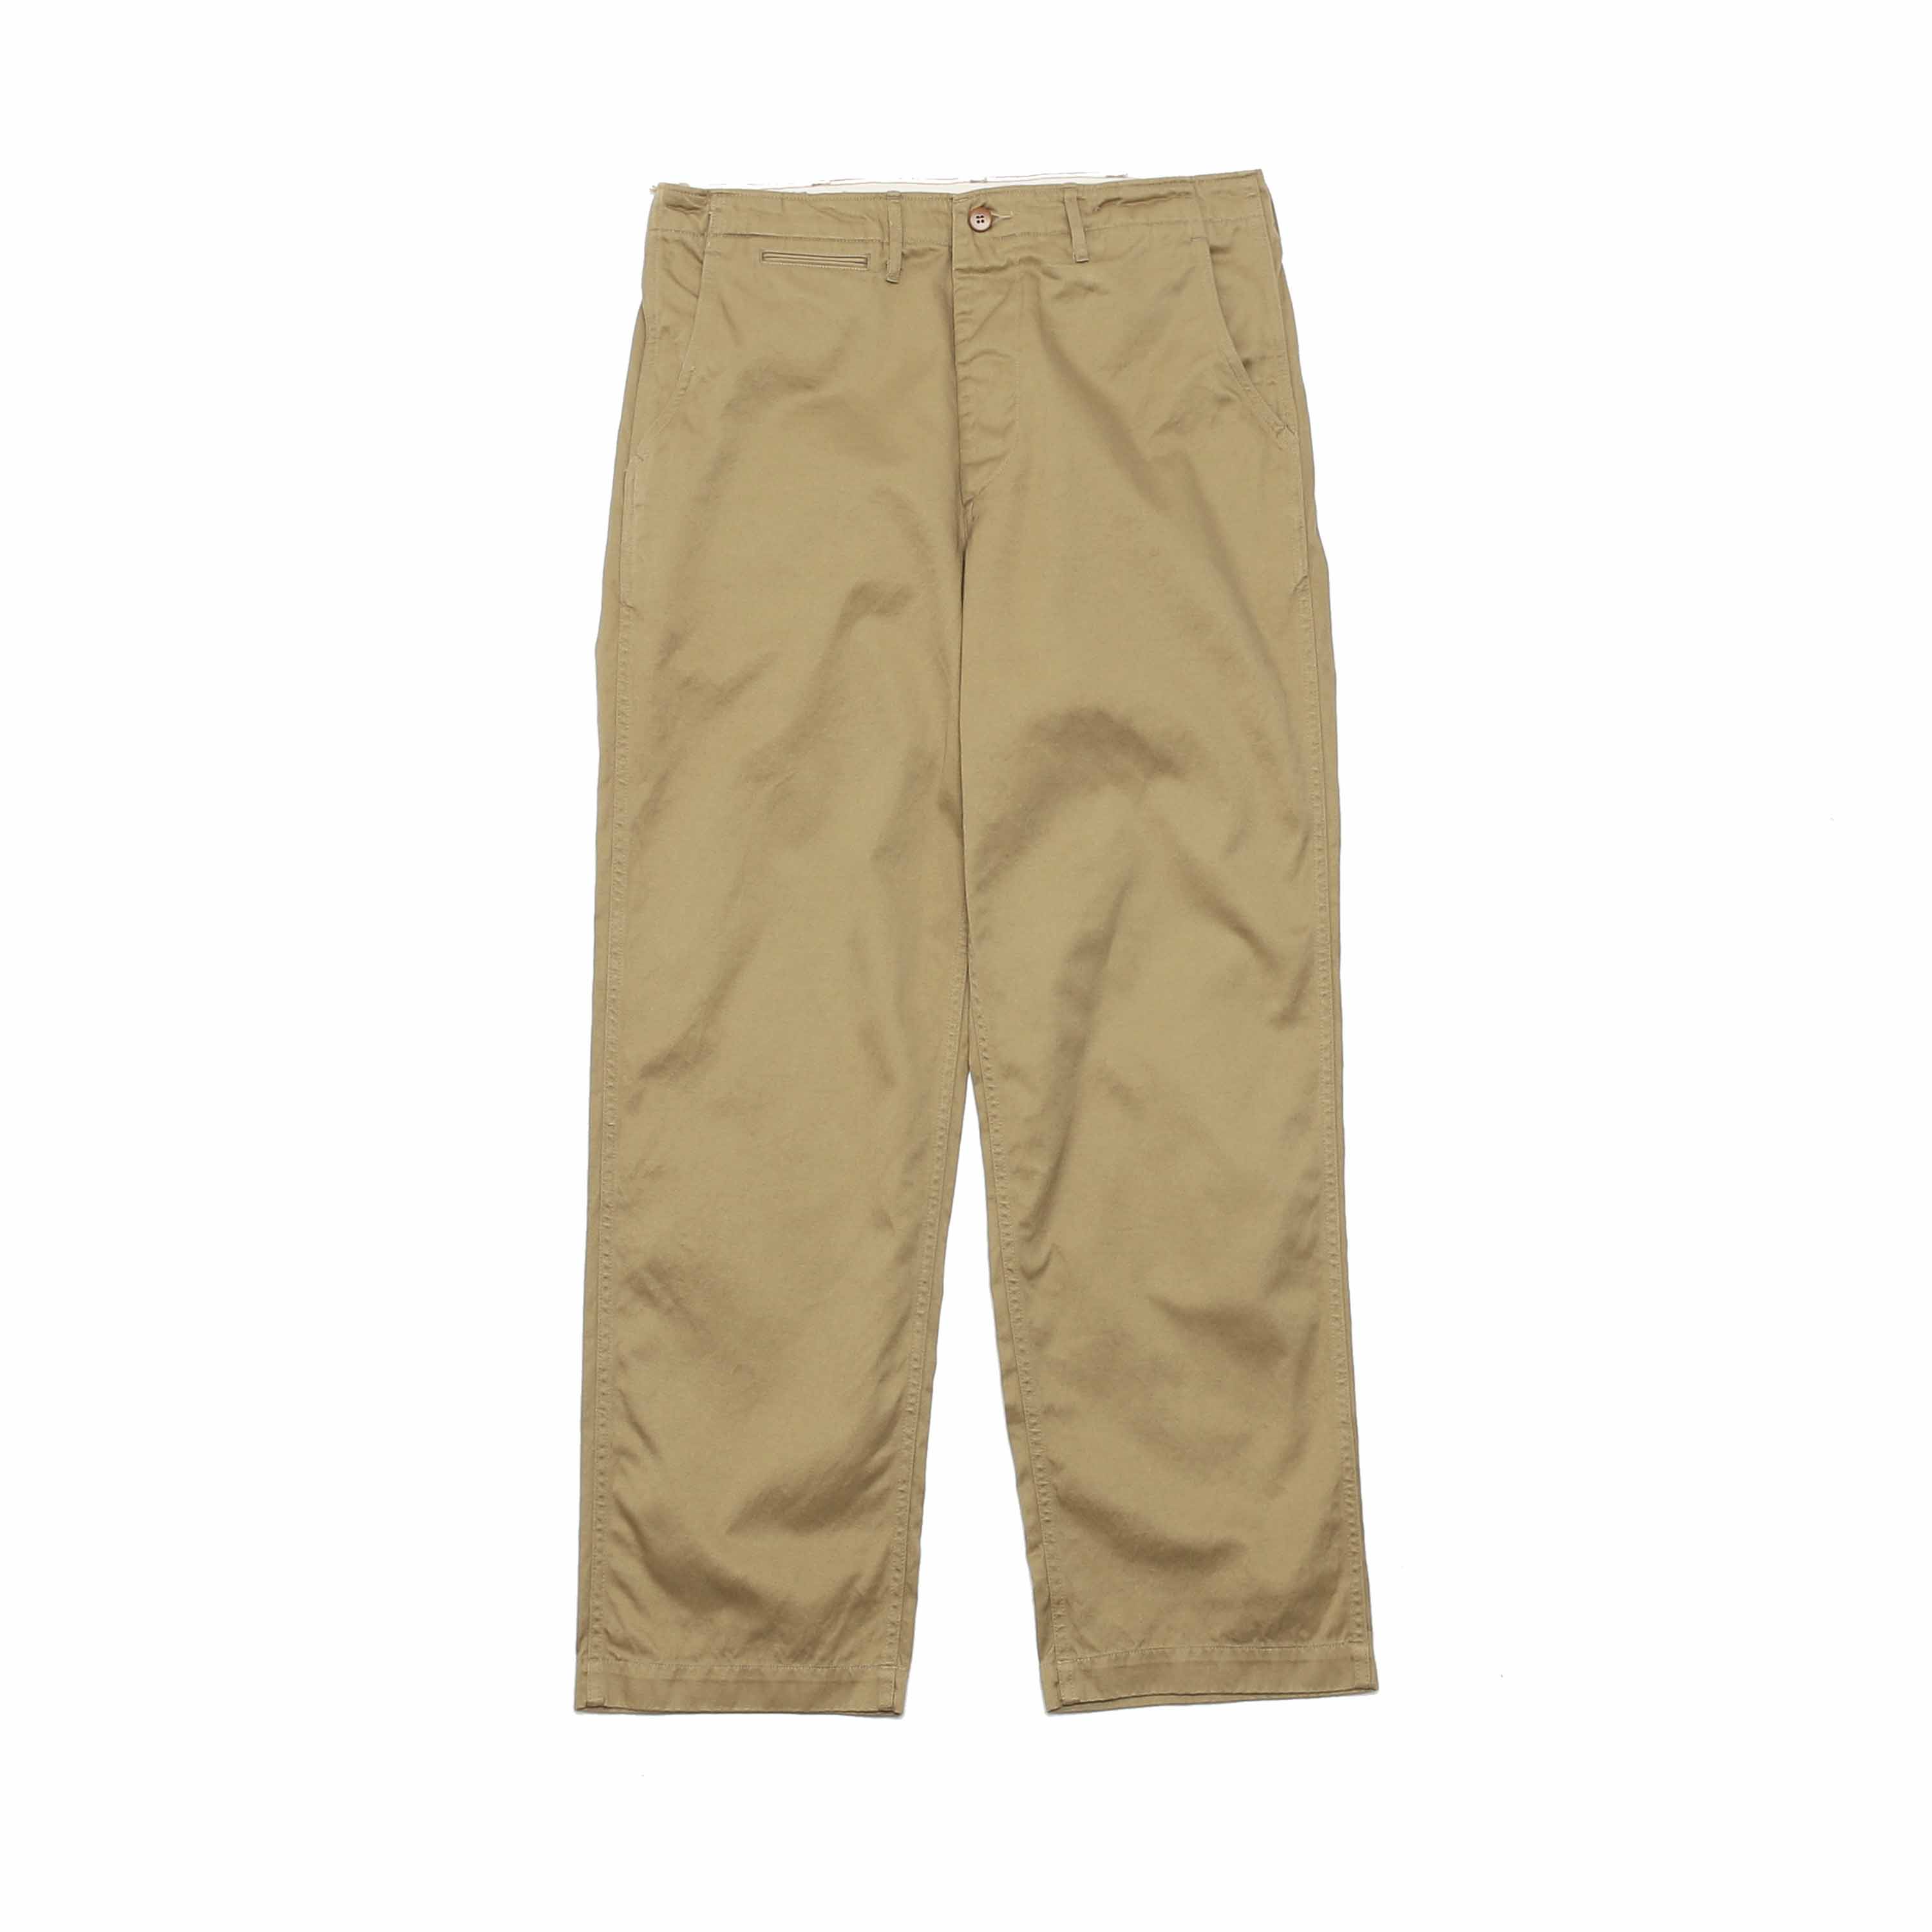 OVERLAND CAMPAIGN TROUSERS(ZY-0210) - KHAKI